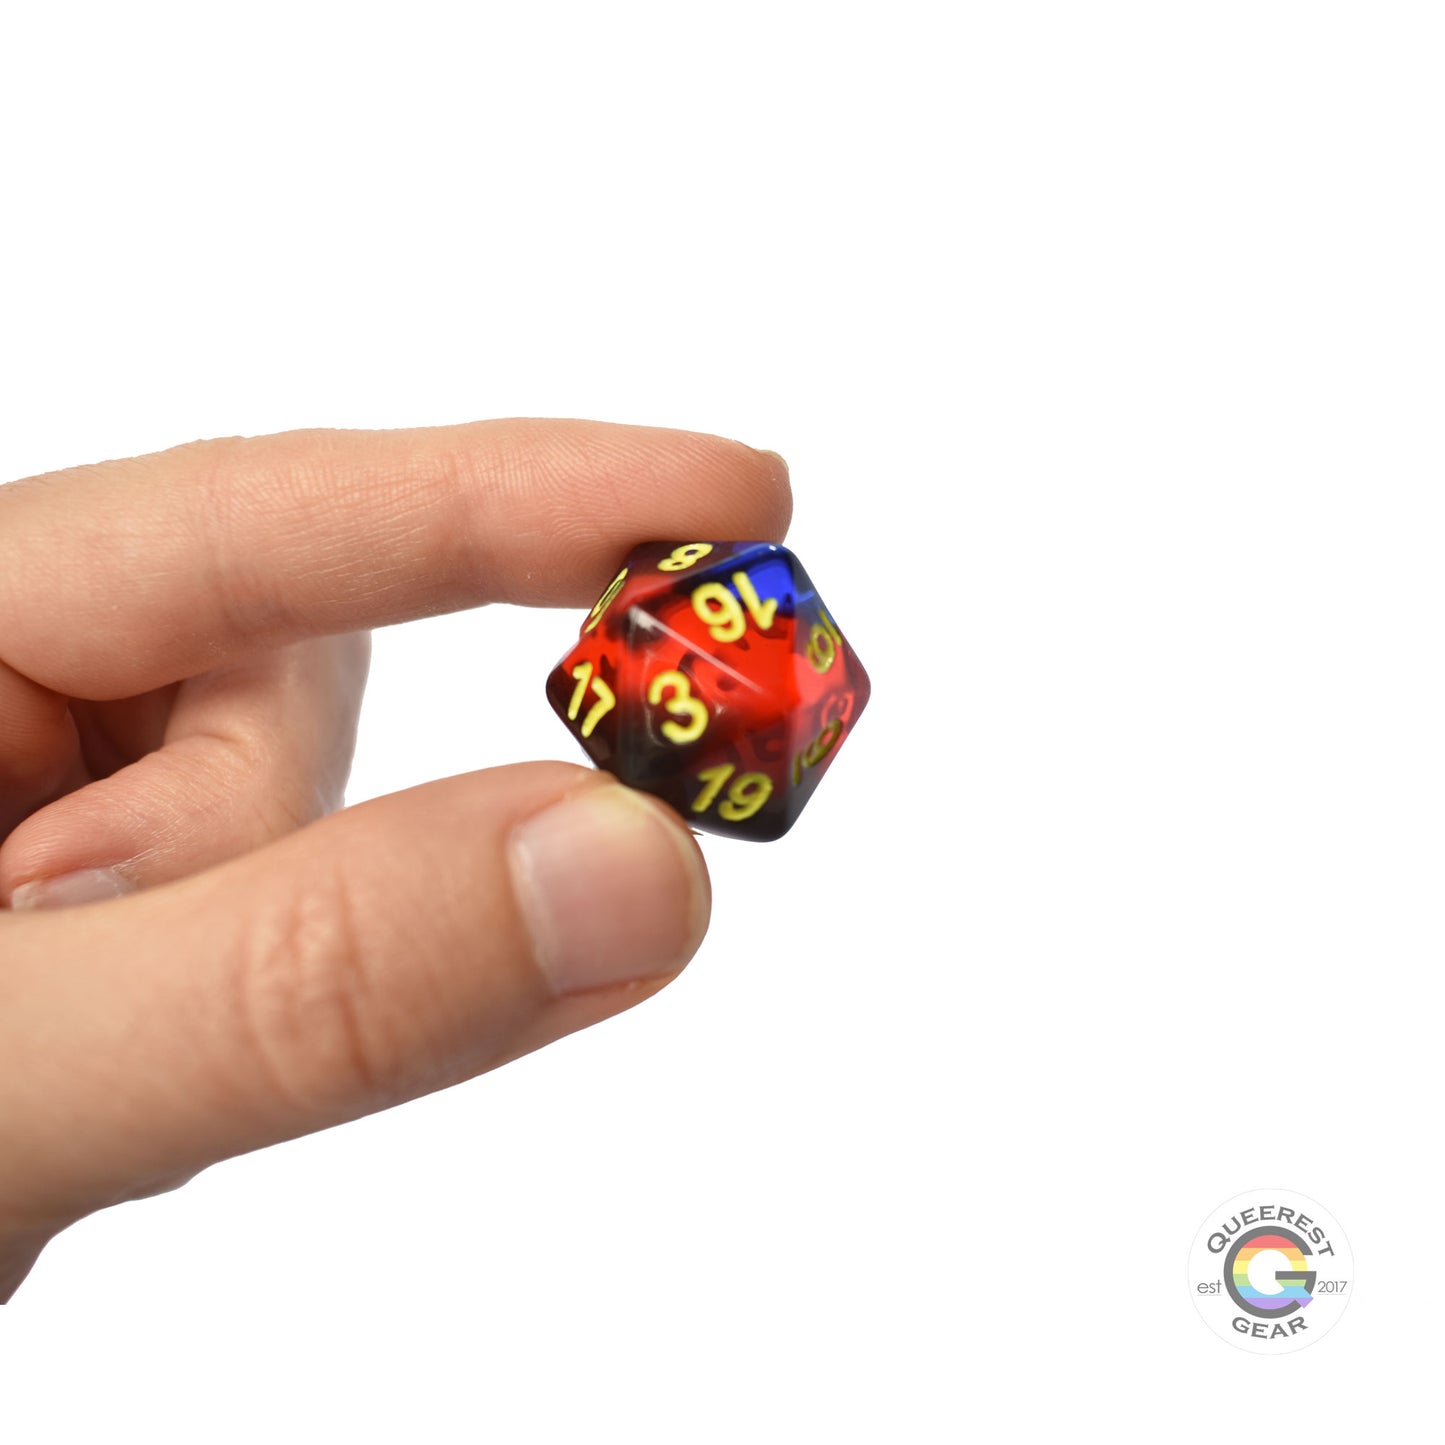 A hand holding up the polyamory d20 to show off the color and transparency